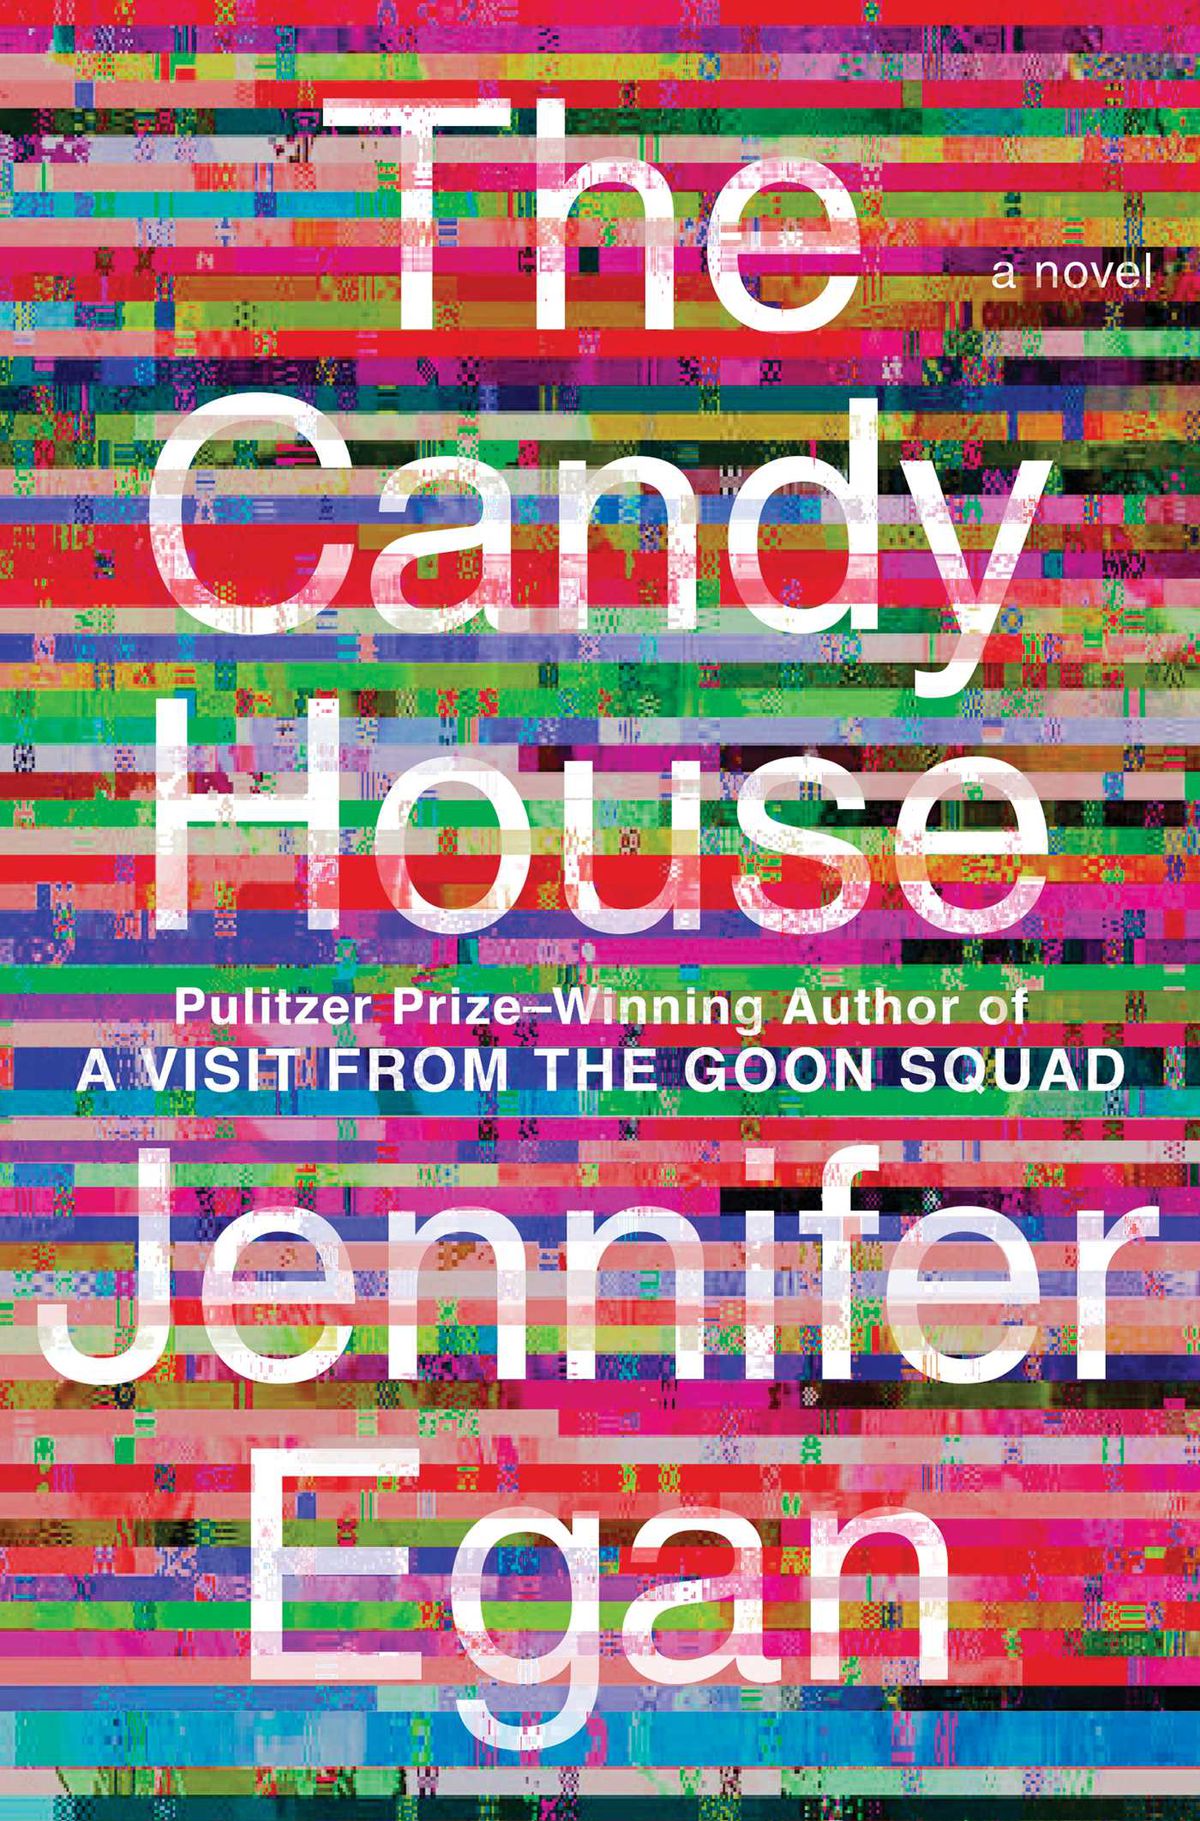 The cover for Jennifer Egan’s The Candy House, with a pixelated image of horizontal lines of all kinds of colors.